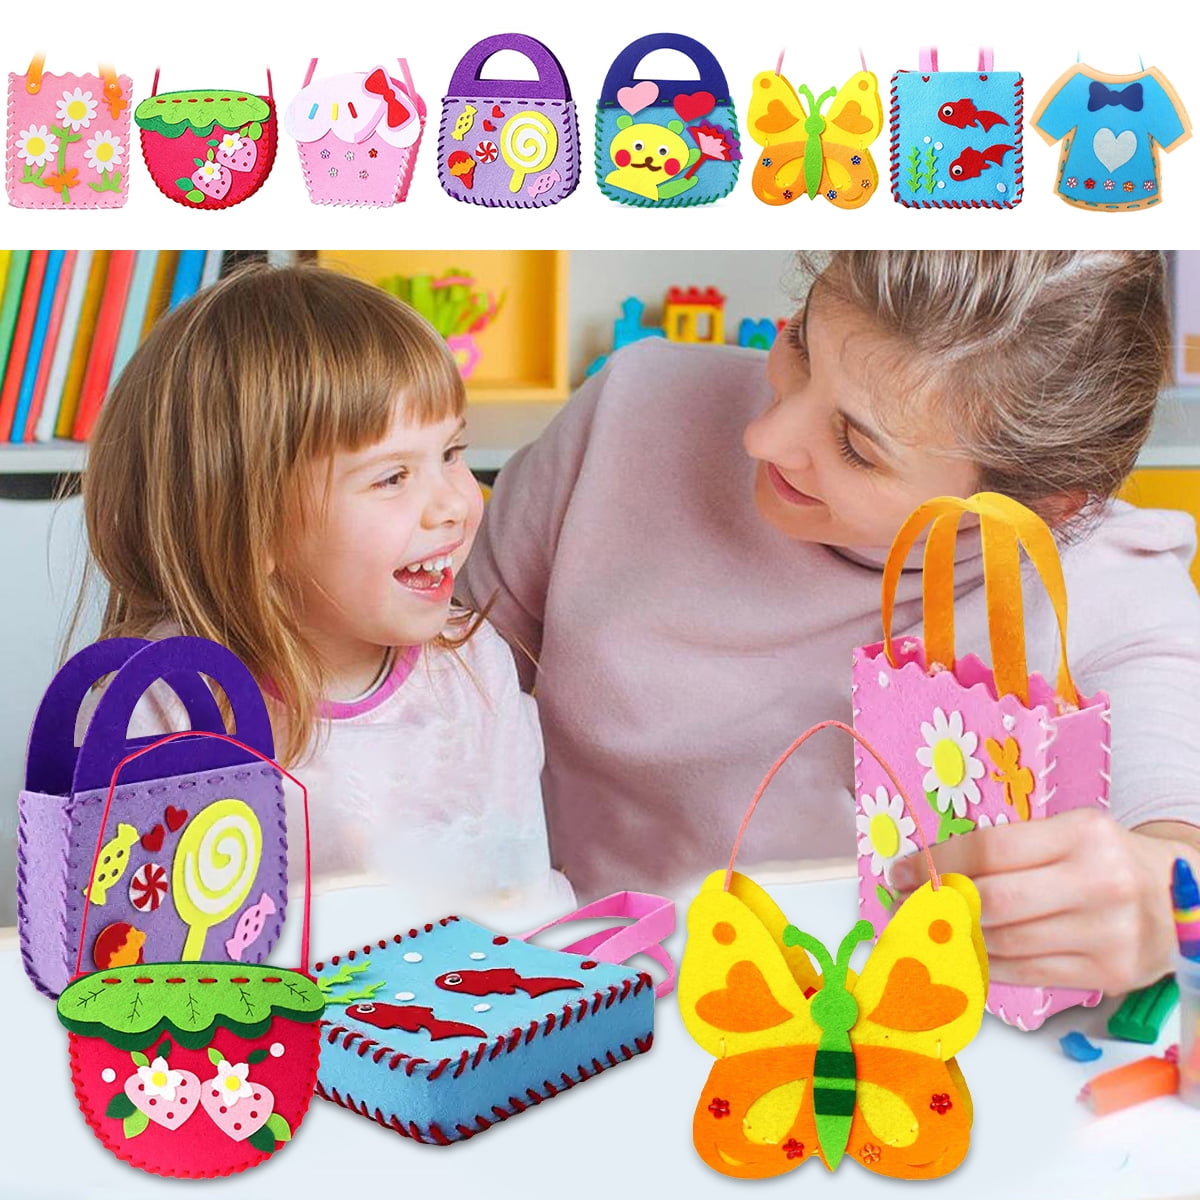 Best Deal for MKLEKYY First Sewing Kit for Kids, DIY Craft Sewing Felts